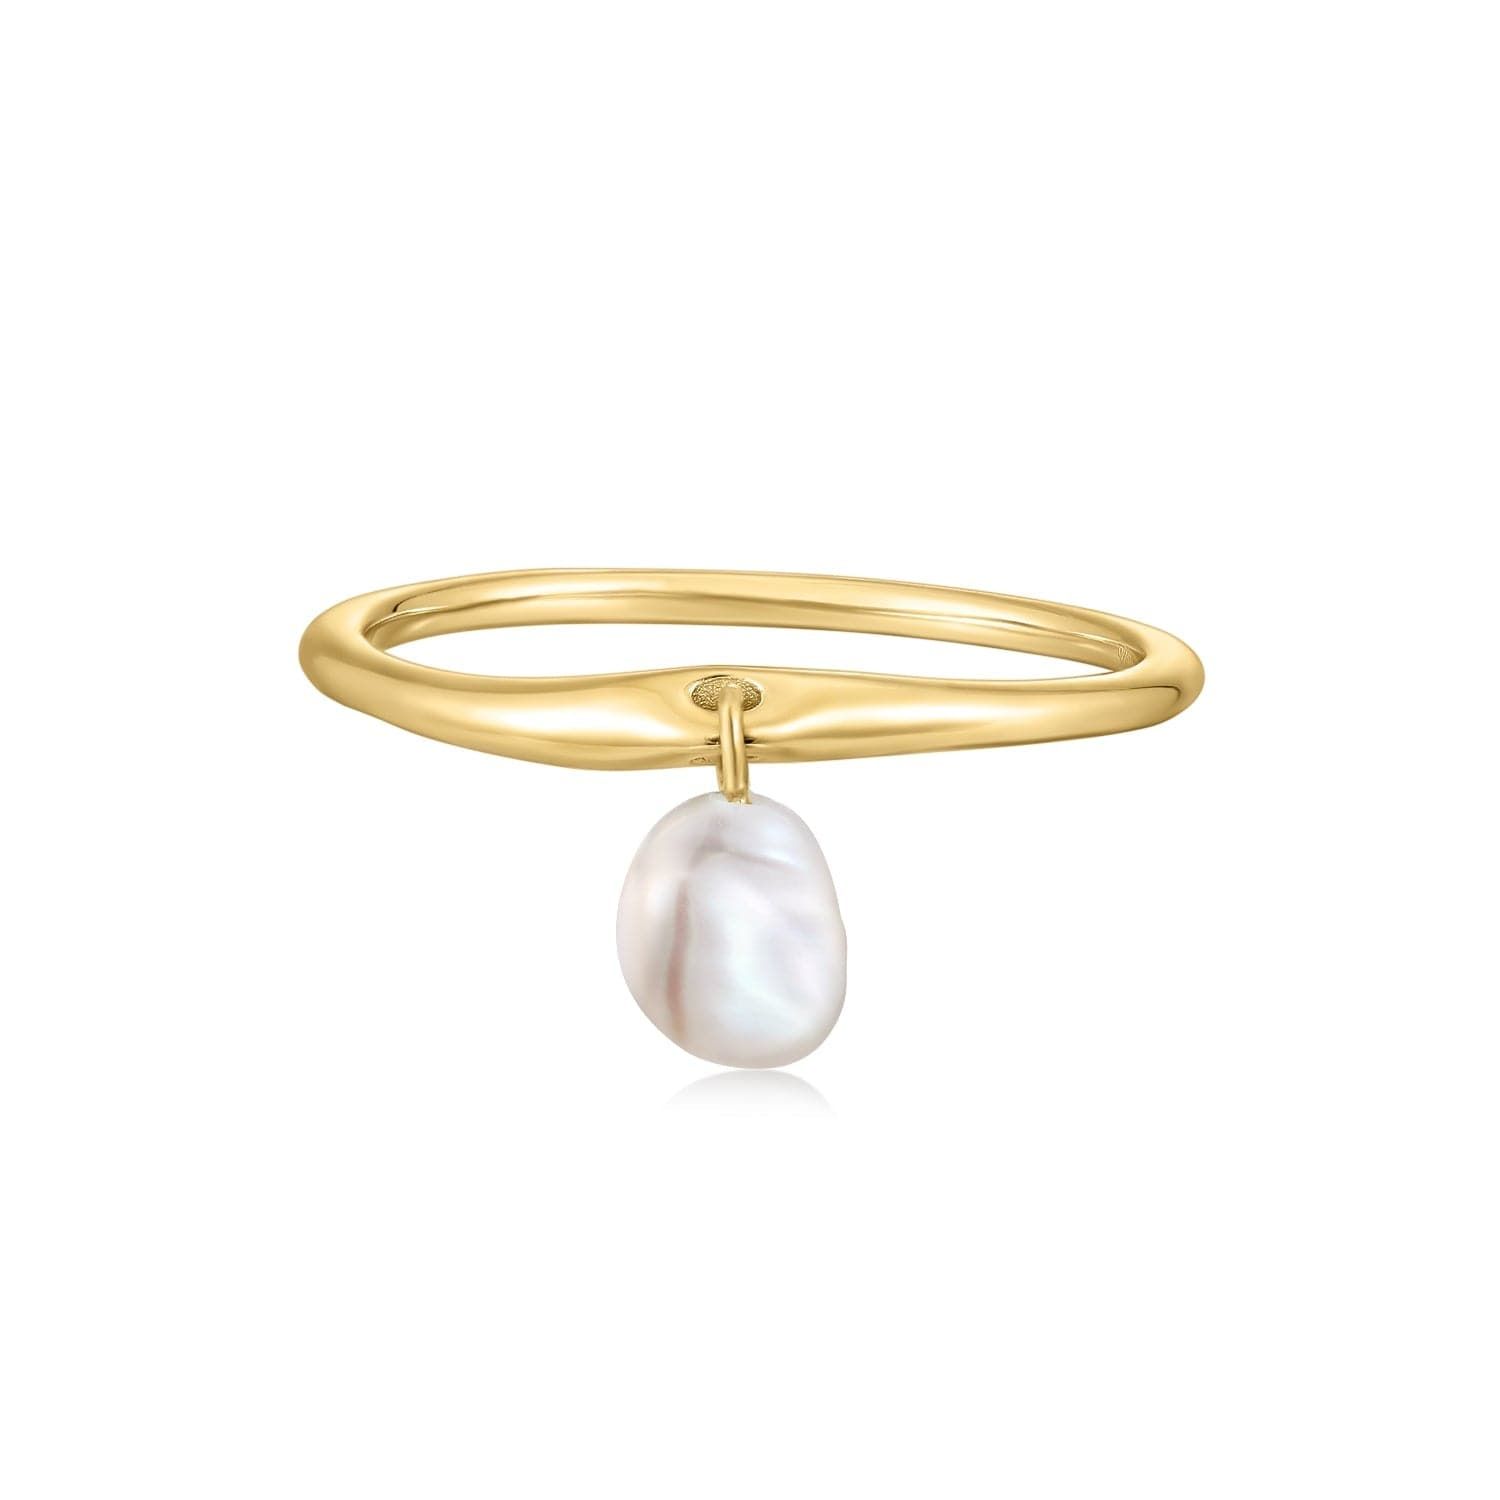 a gold ring with a white pearl